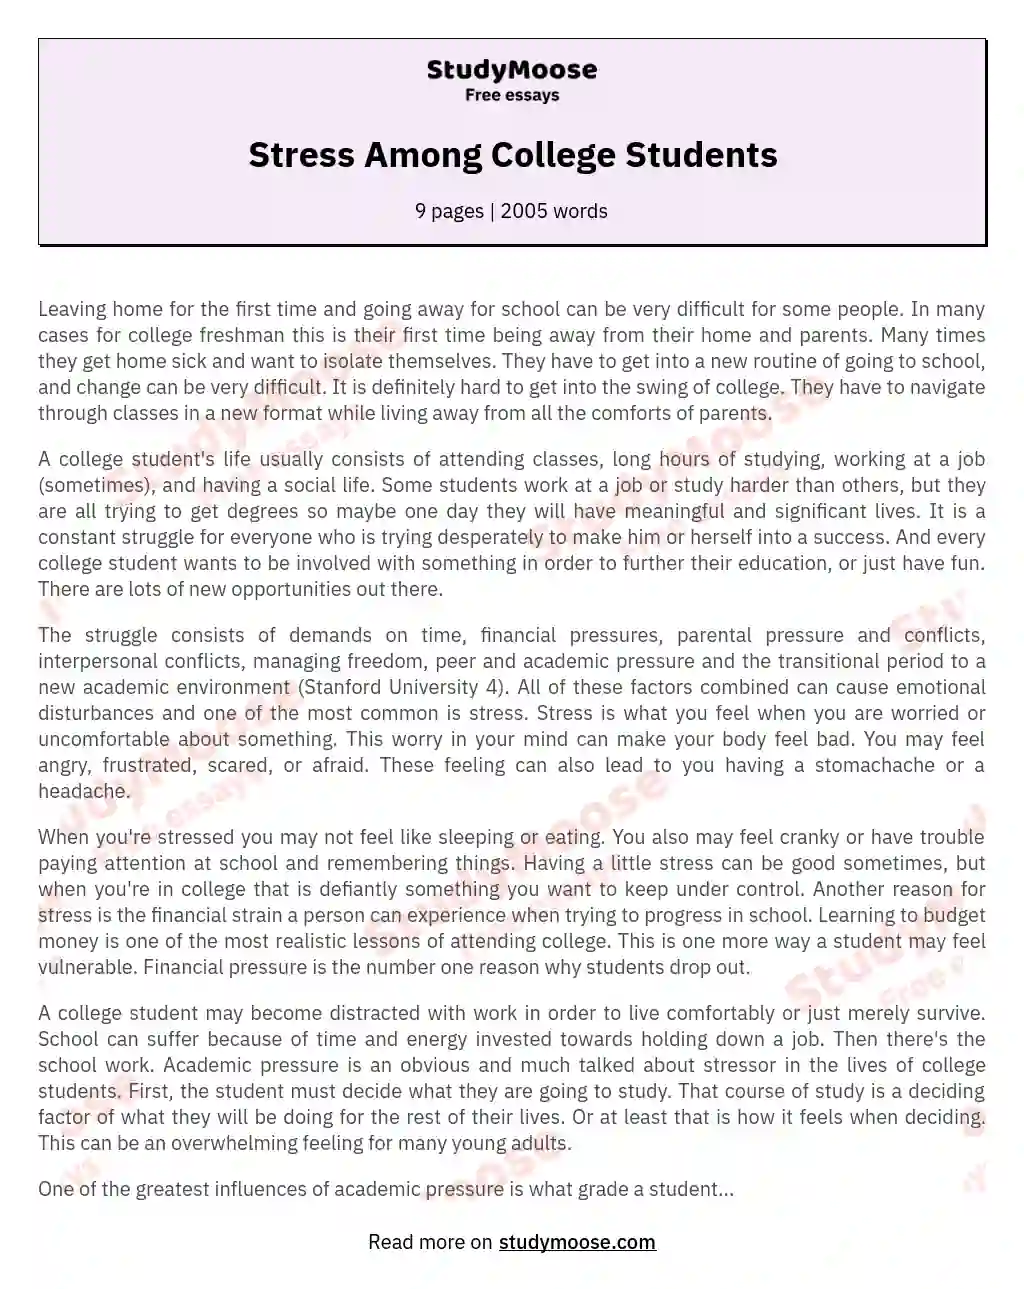 Stress Among College Students essay